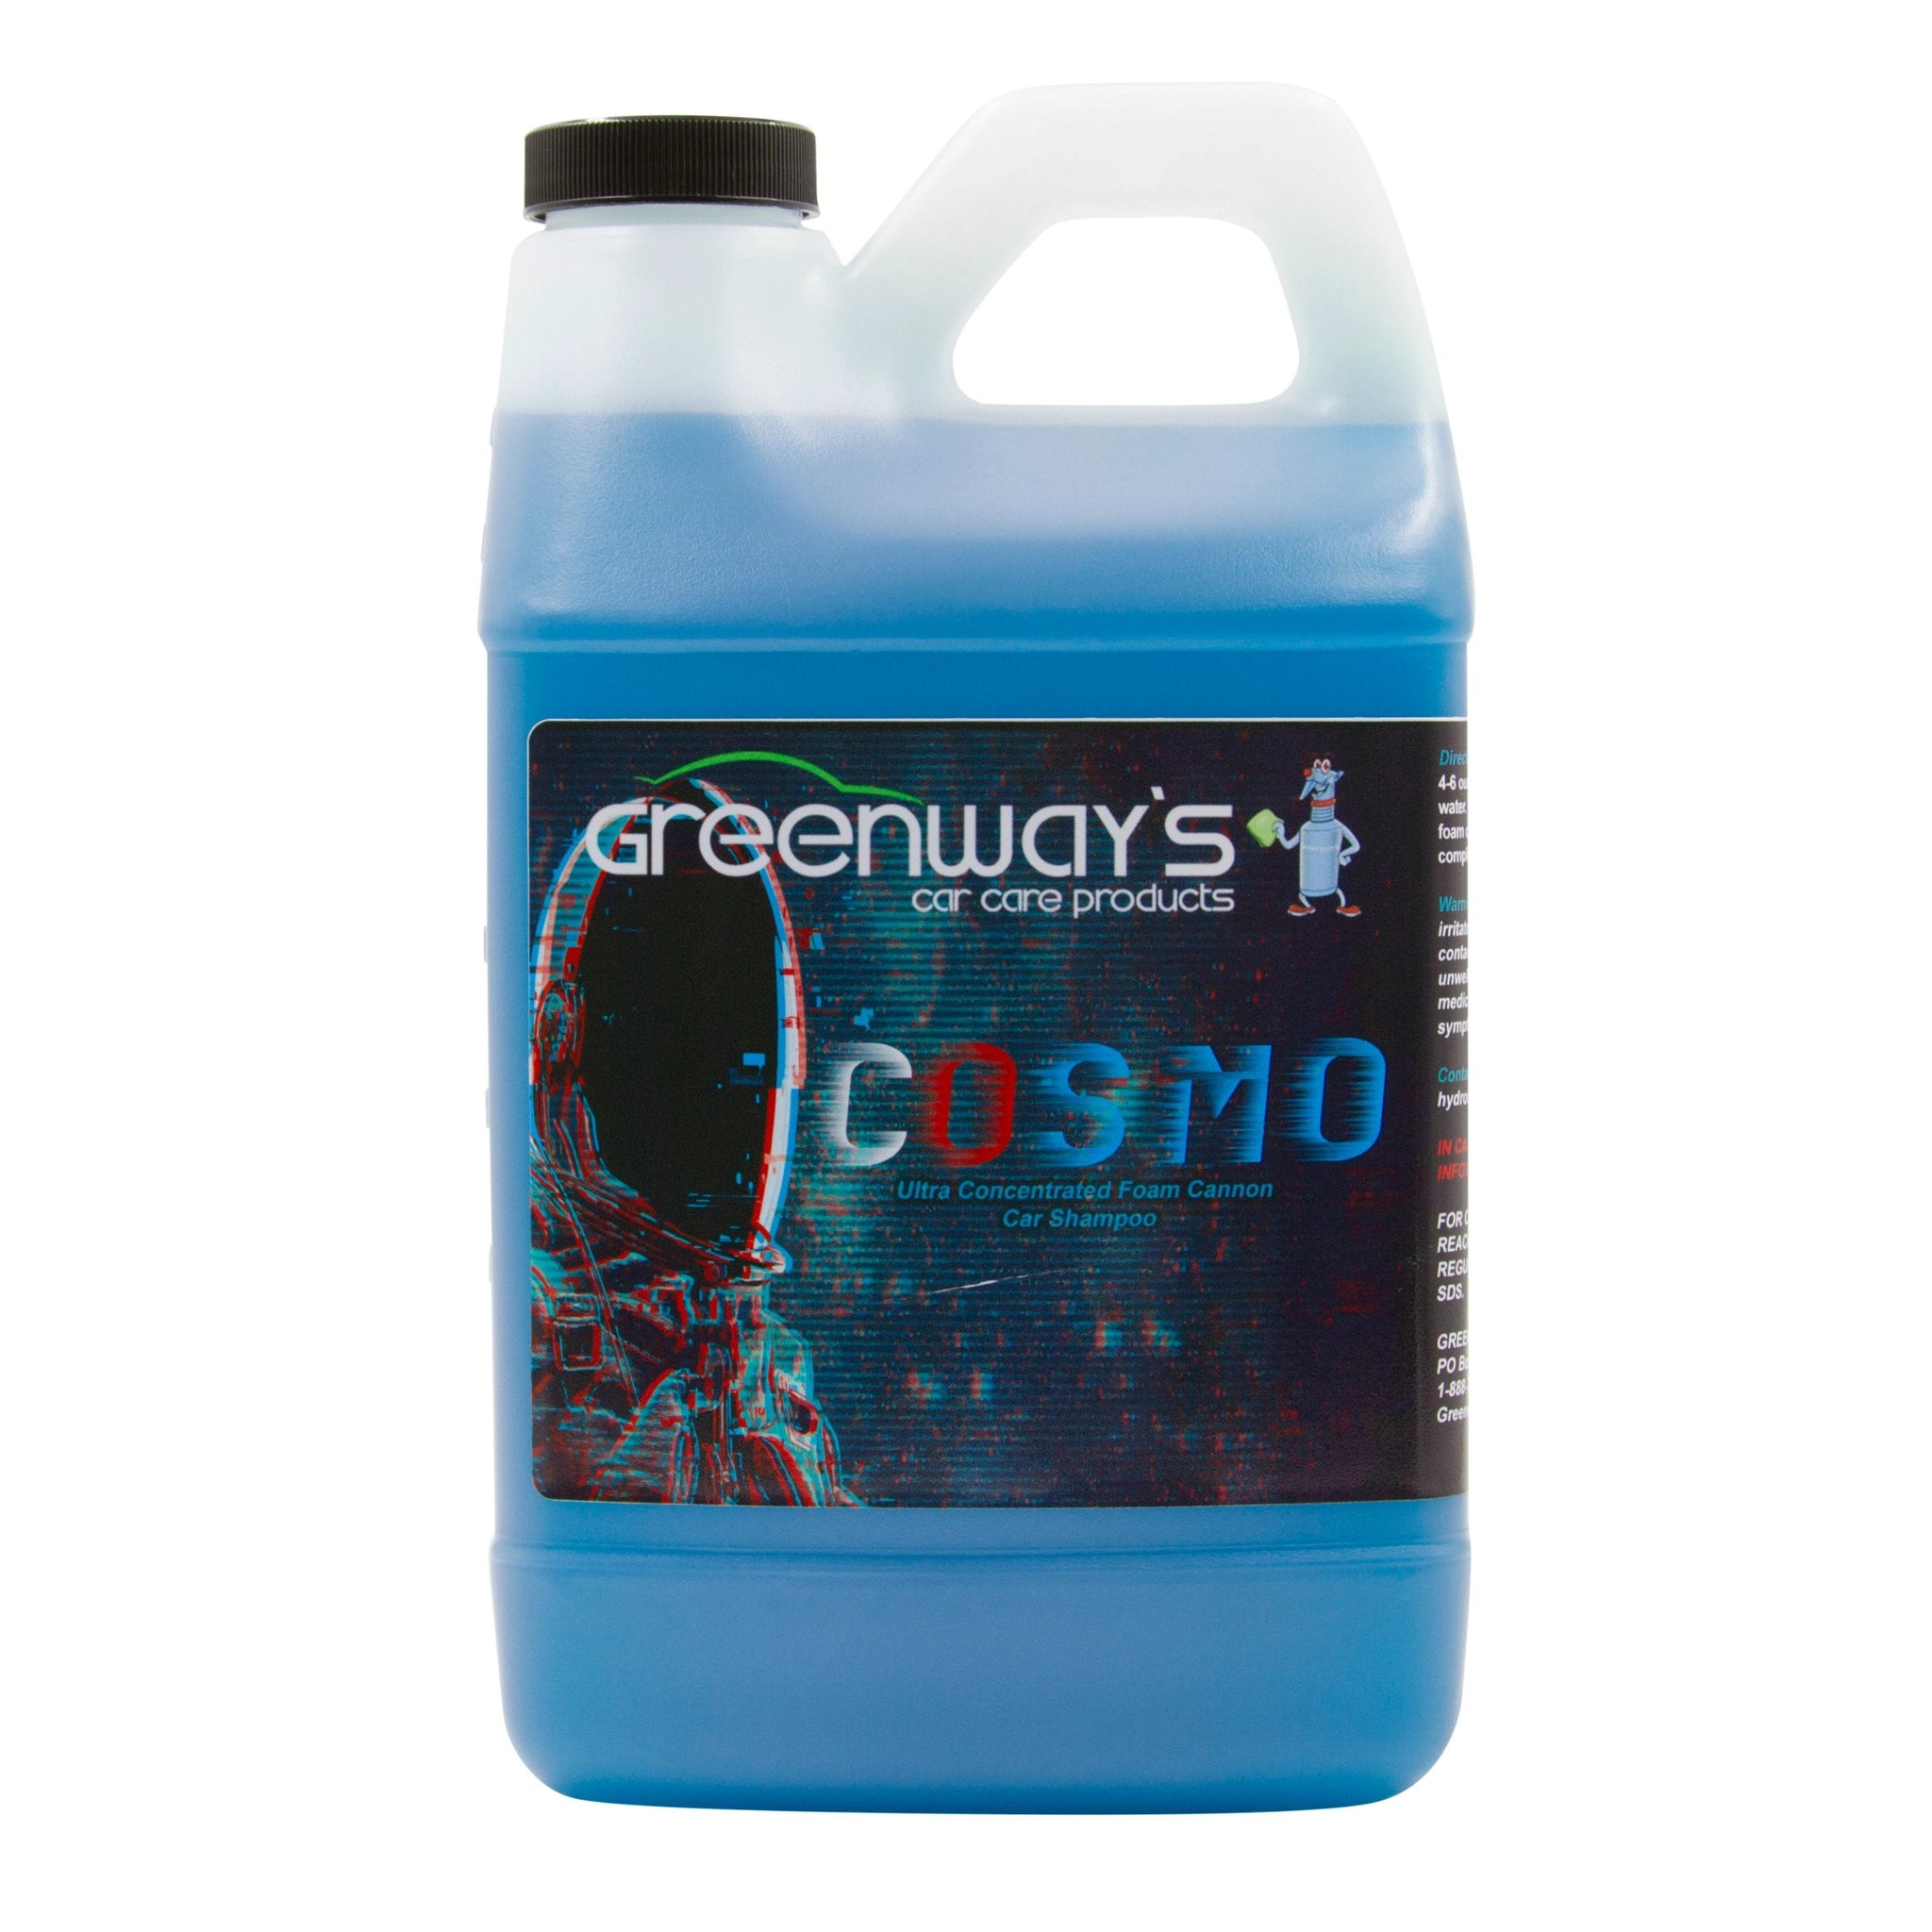 Greenway’s Car Care Products, Cosmo, ultra-concentrated, pH neutral, low or high-pressure foam cannon car shampoo, 64 ounces.